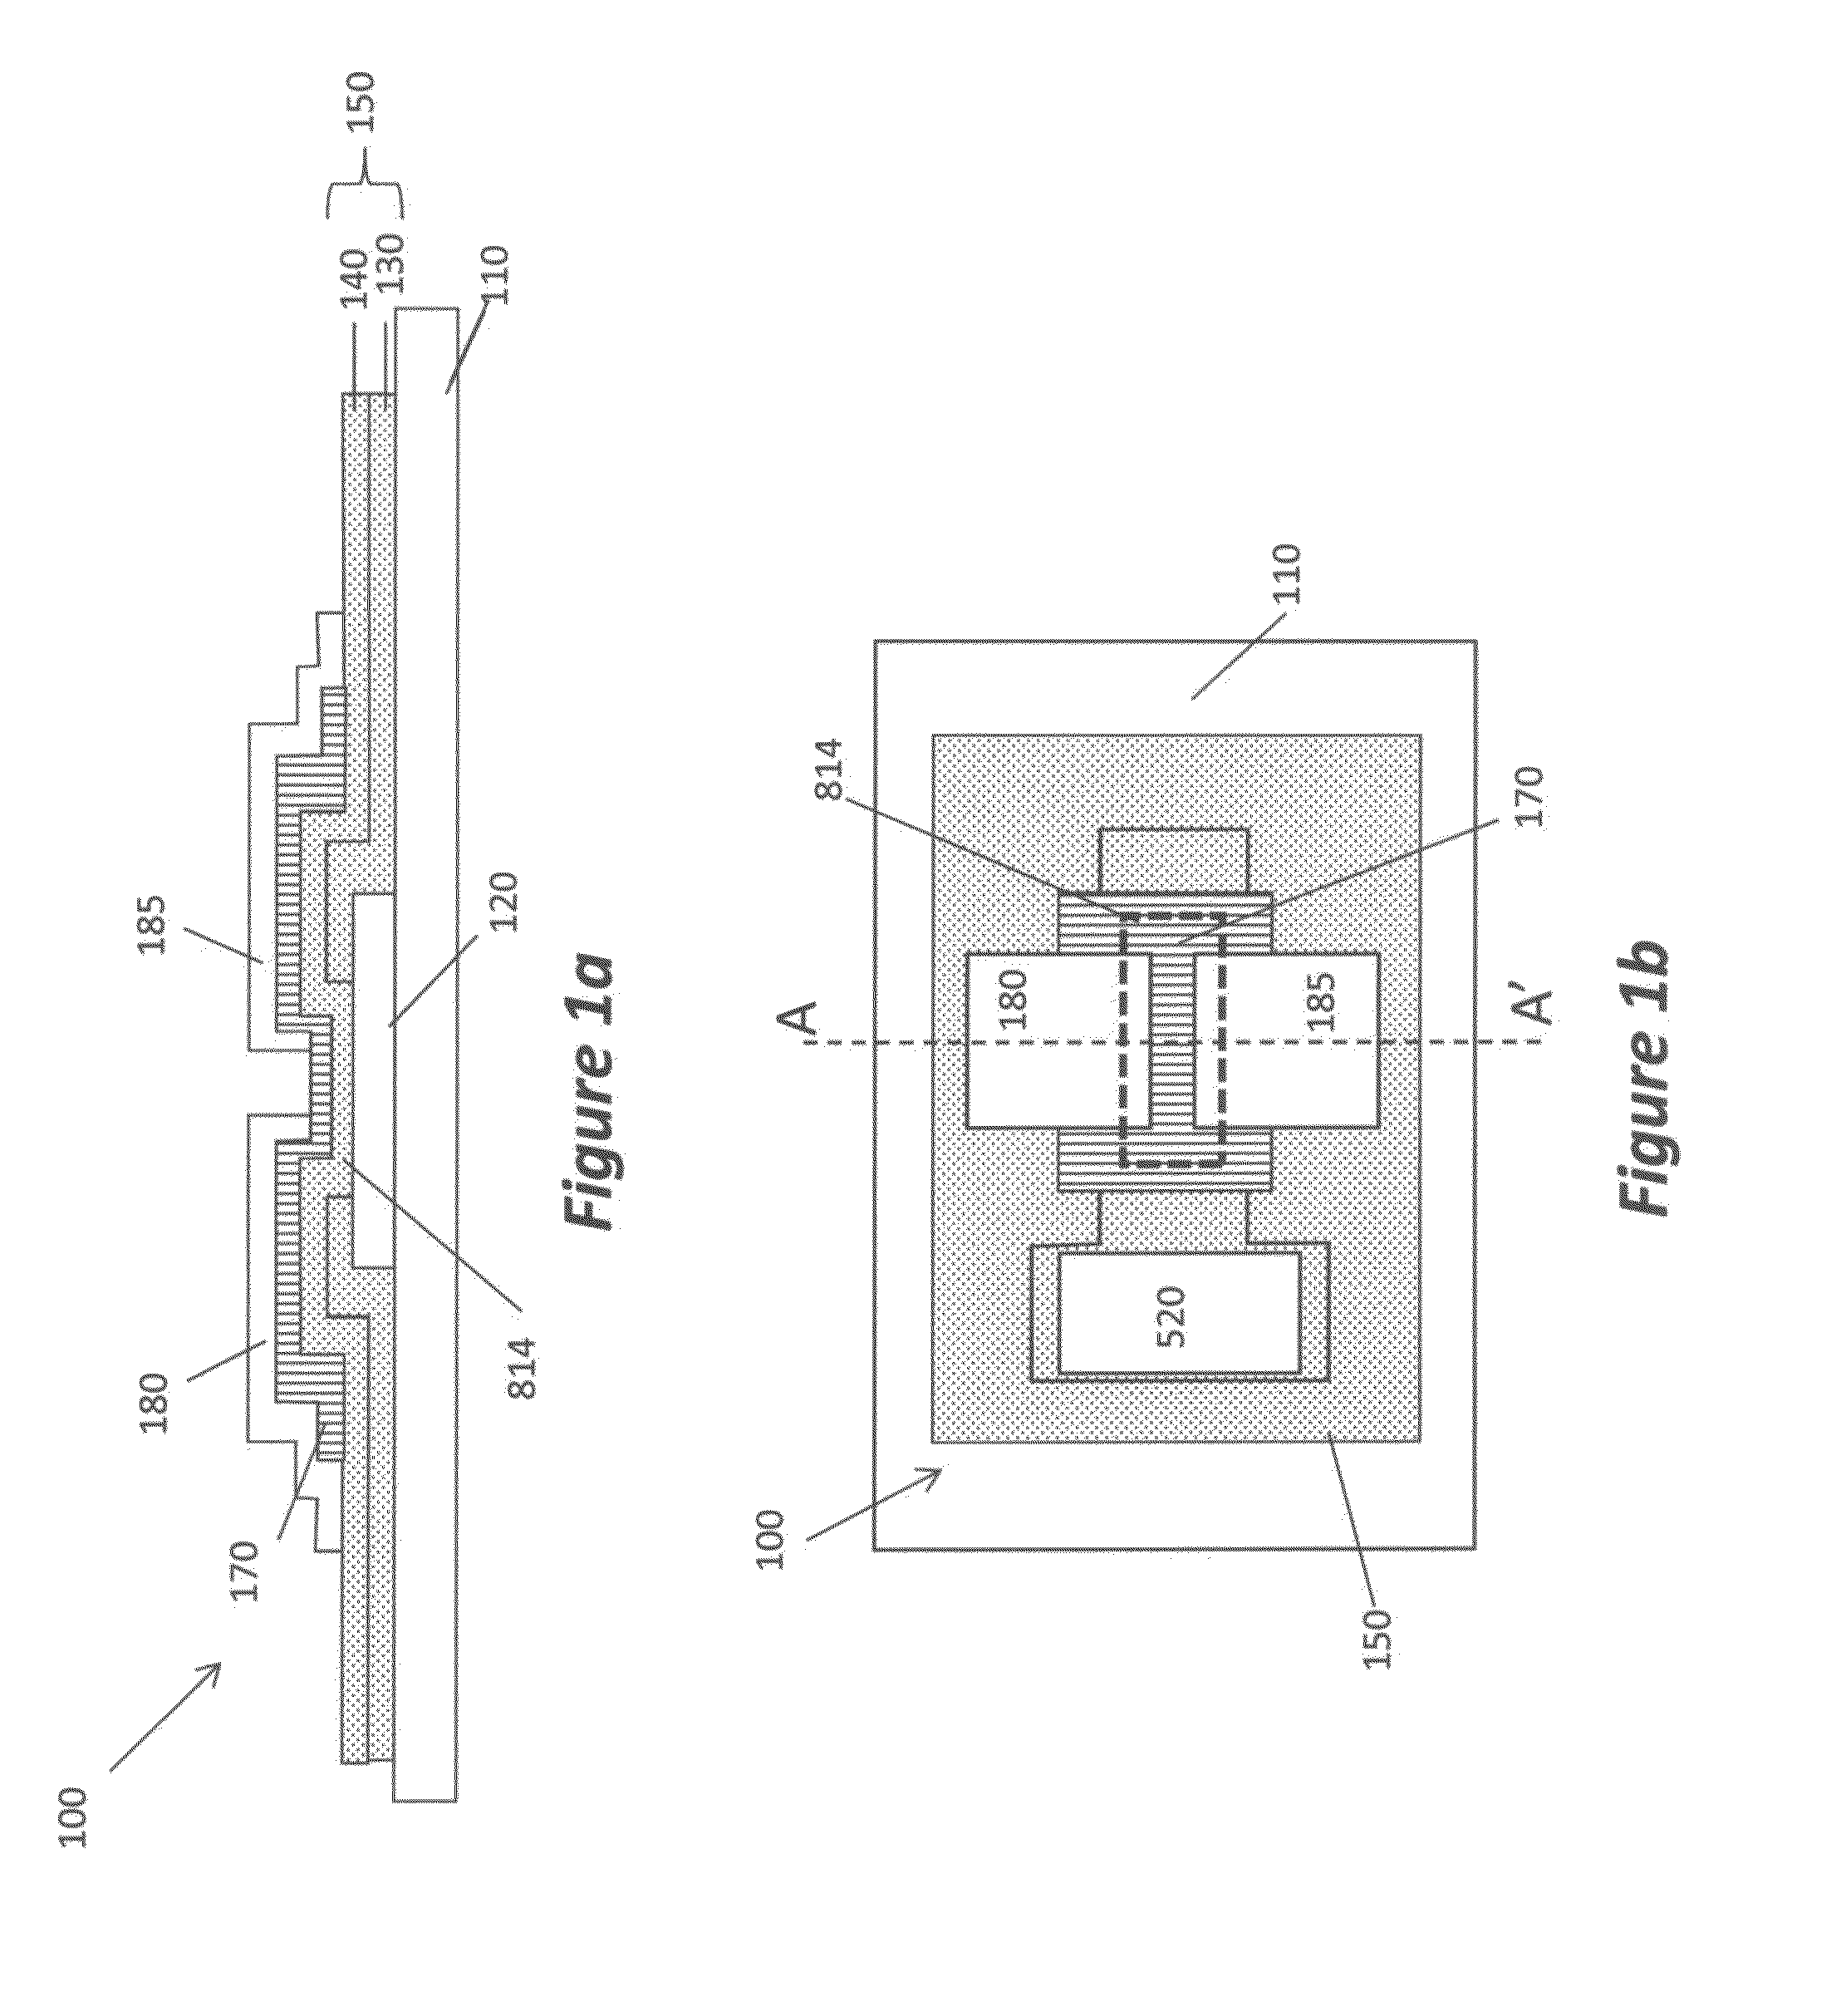 TFT substrate with variable dielectric thickness